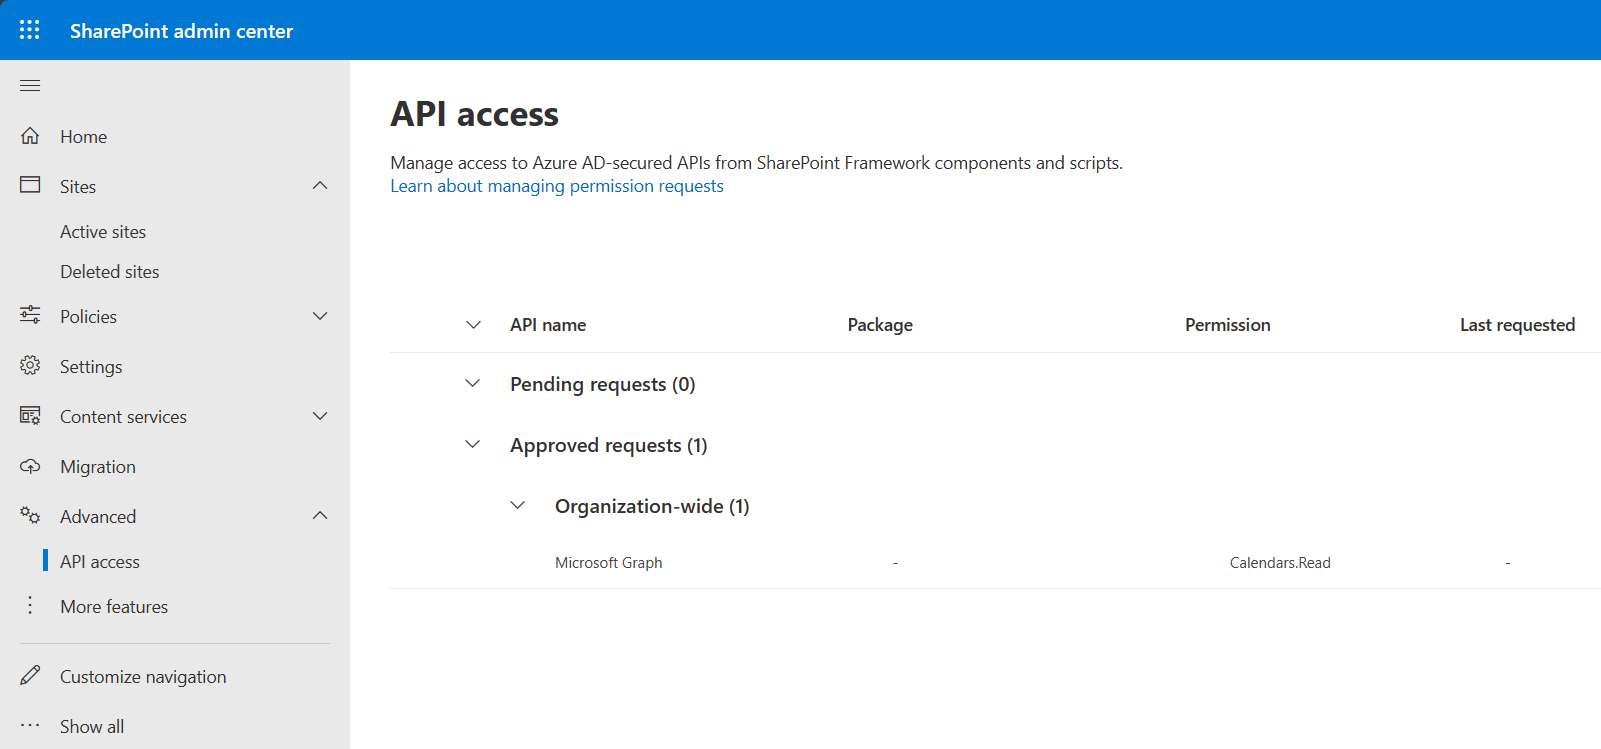 API acess page in the SharePoint admin center